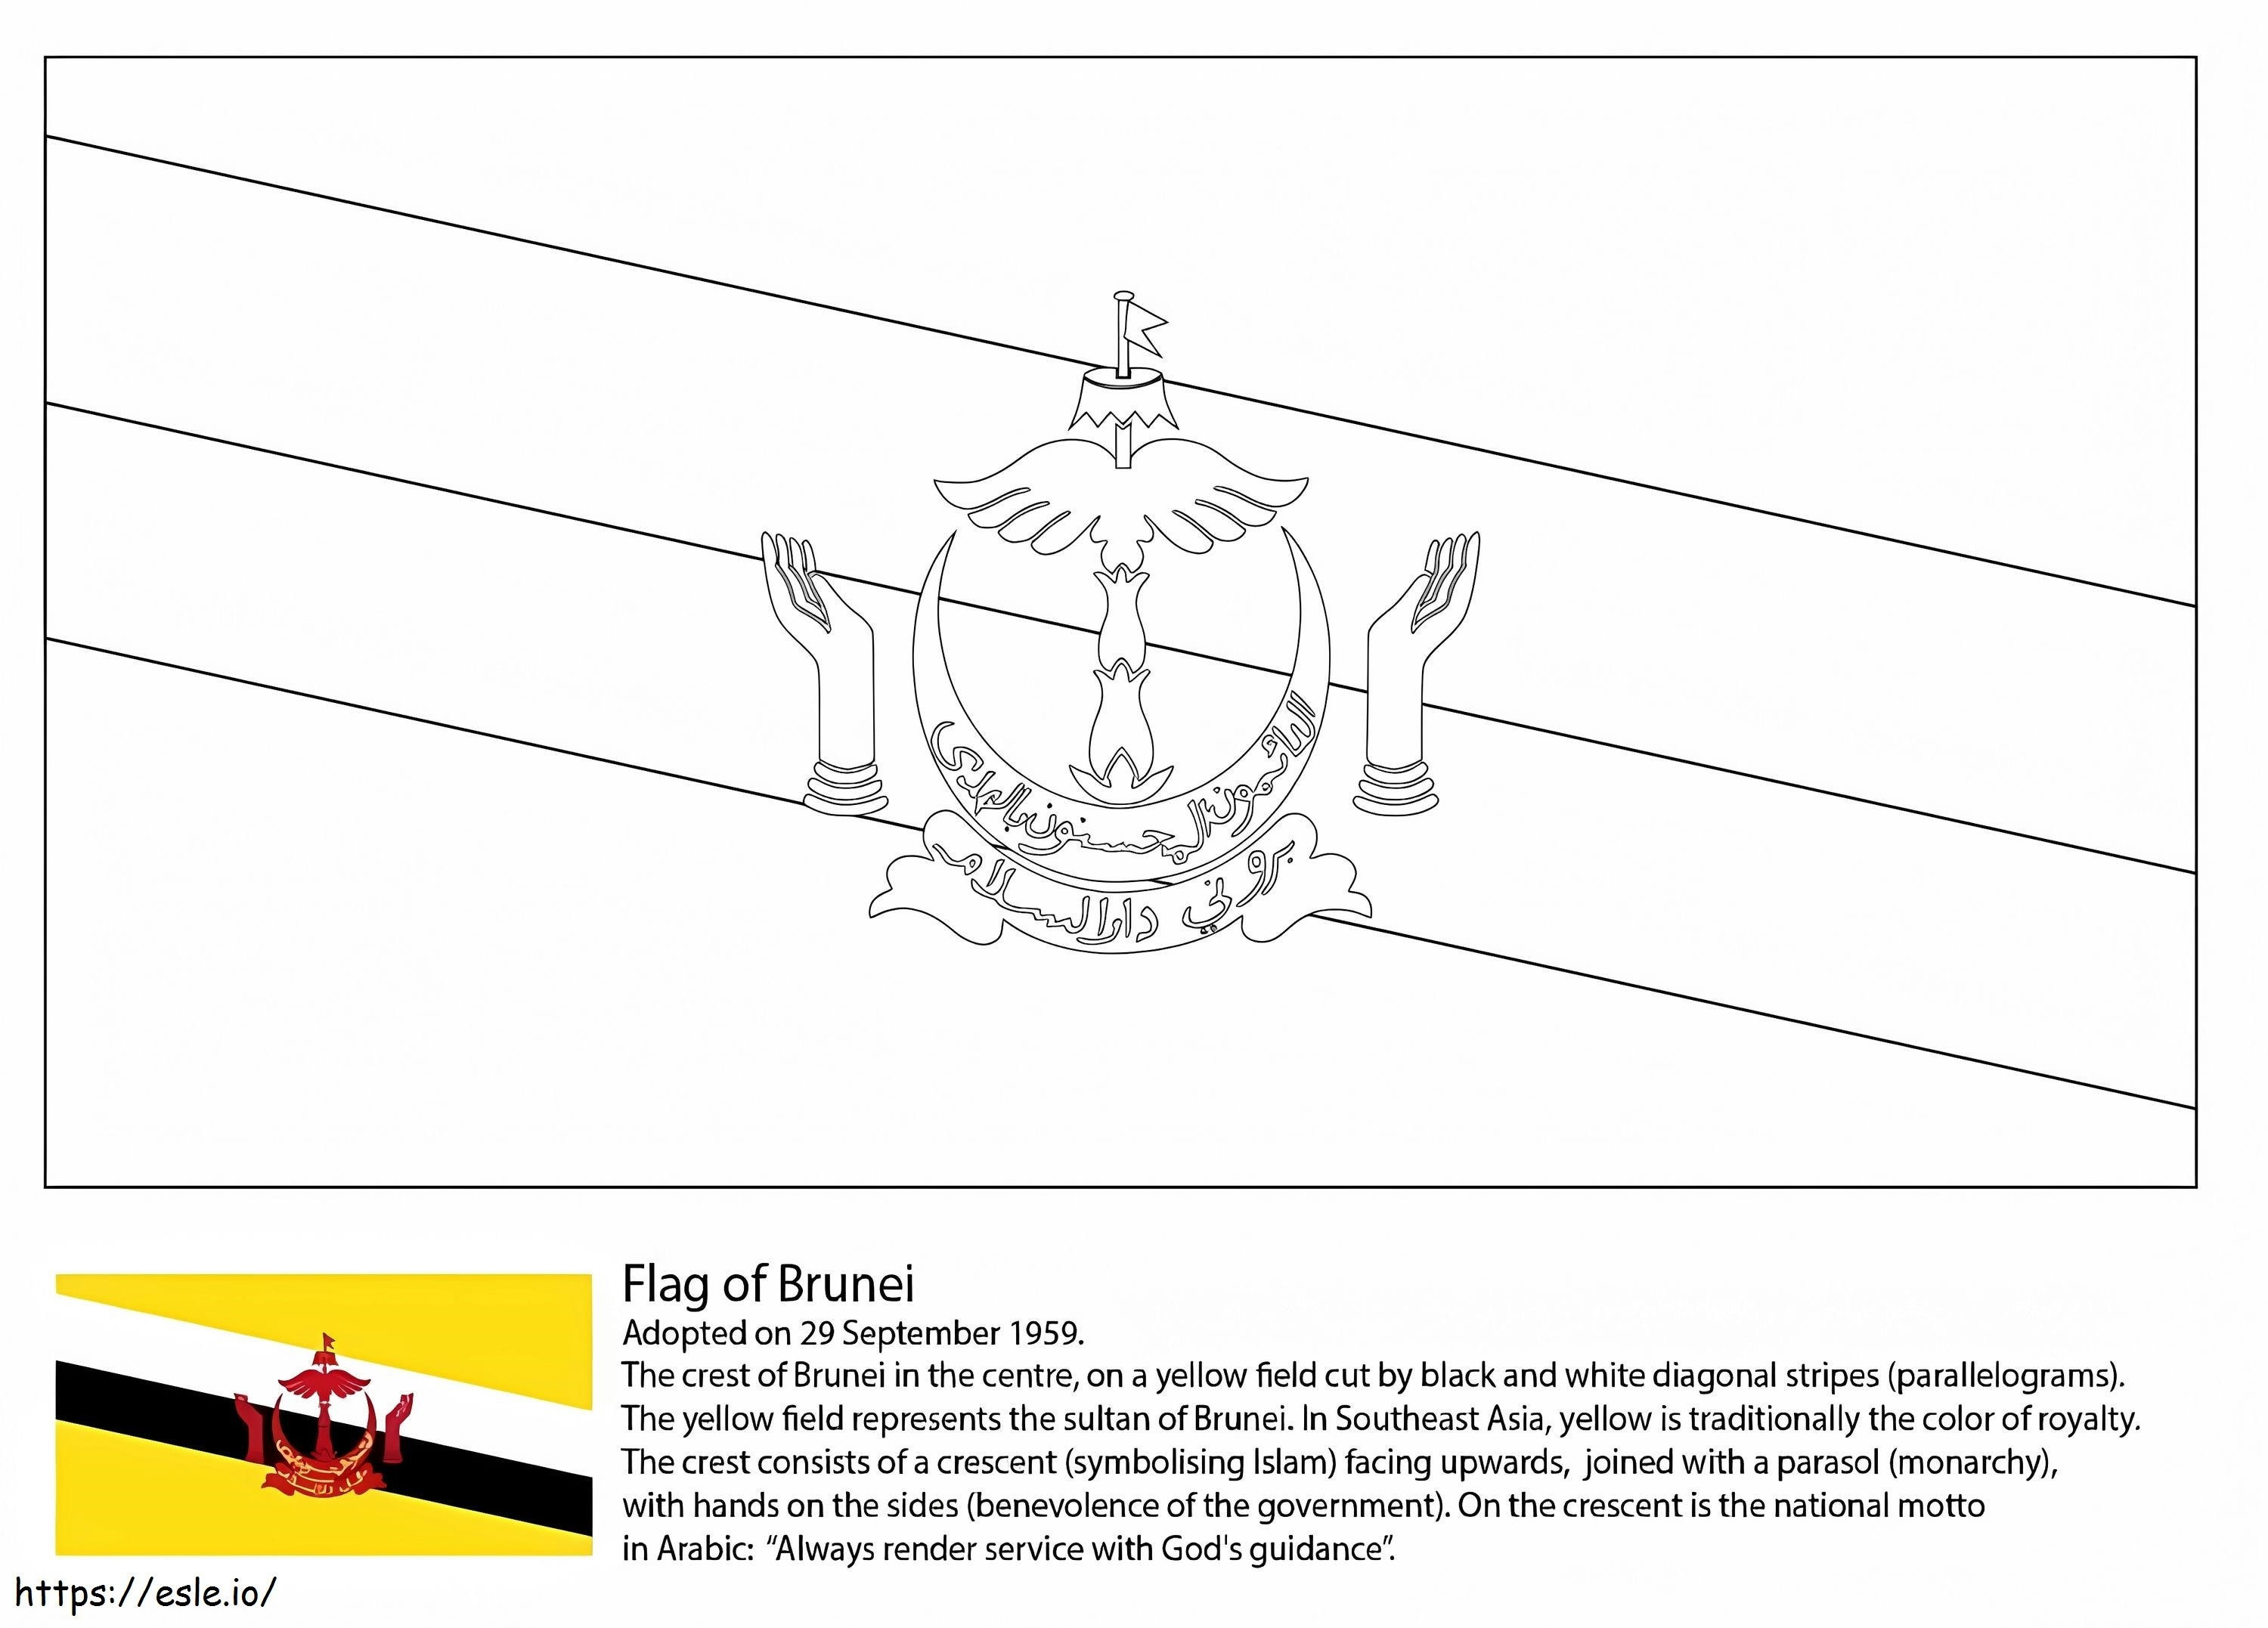 Brunei Flag coloring page